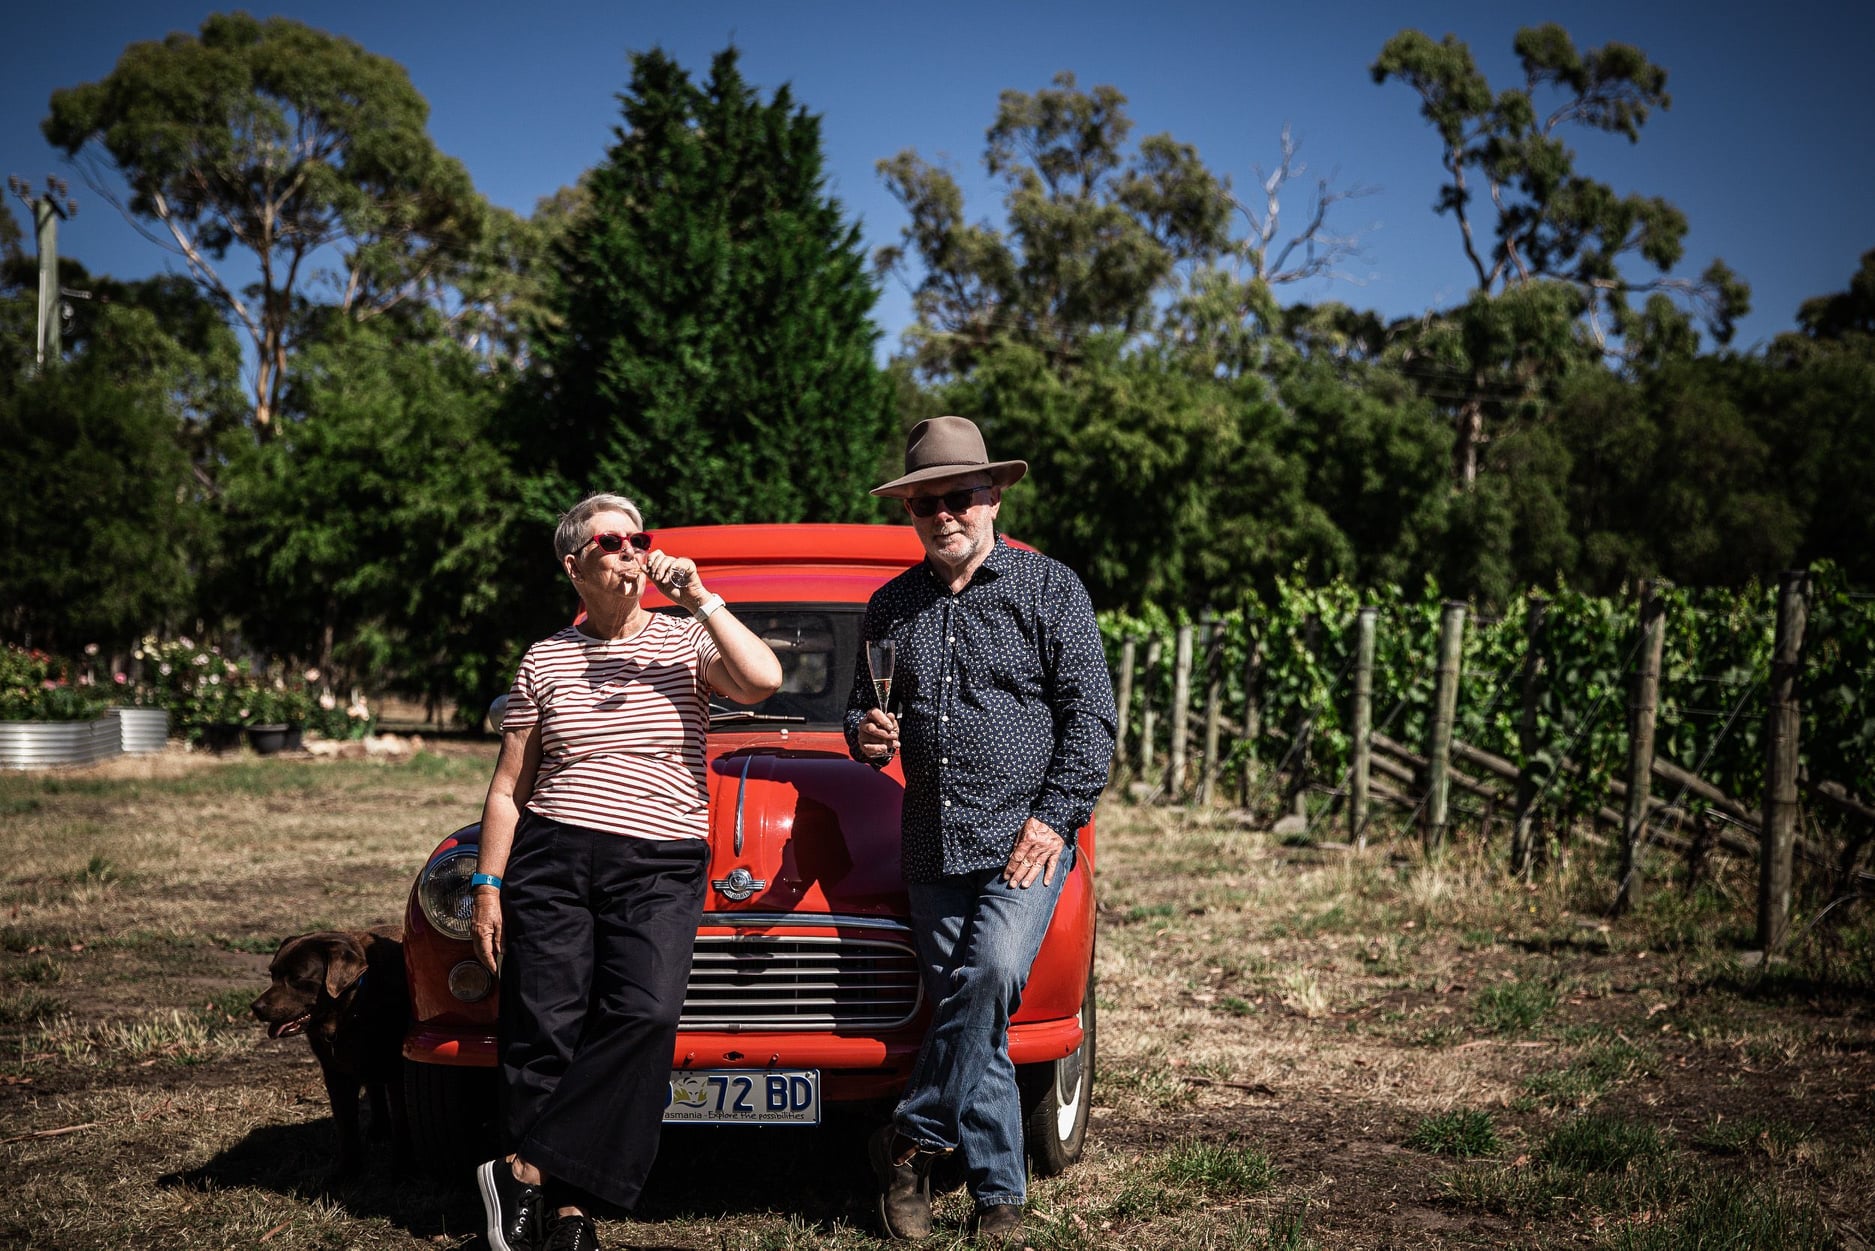 Lyn and Michael Rochford sip their sparkling wine in front of a red van at the vineyard